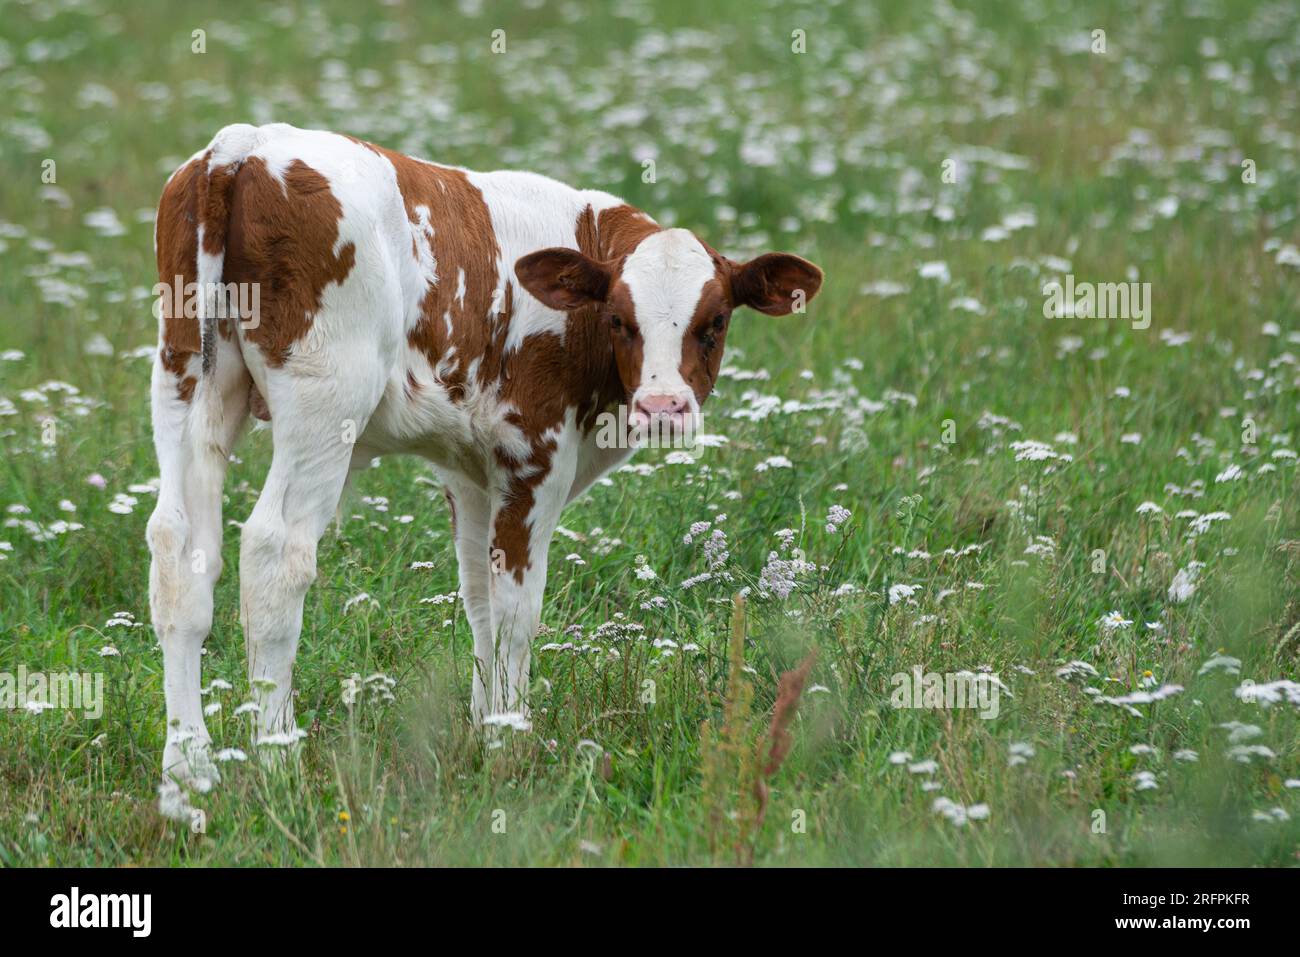 white with brown spotted cow baby calf is grazing in a green meadow with white flowers and looking directly into the camera. Stock Photo